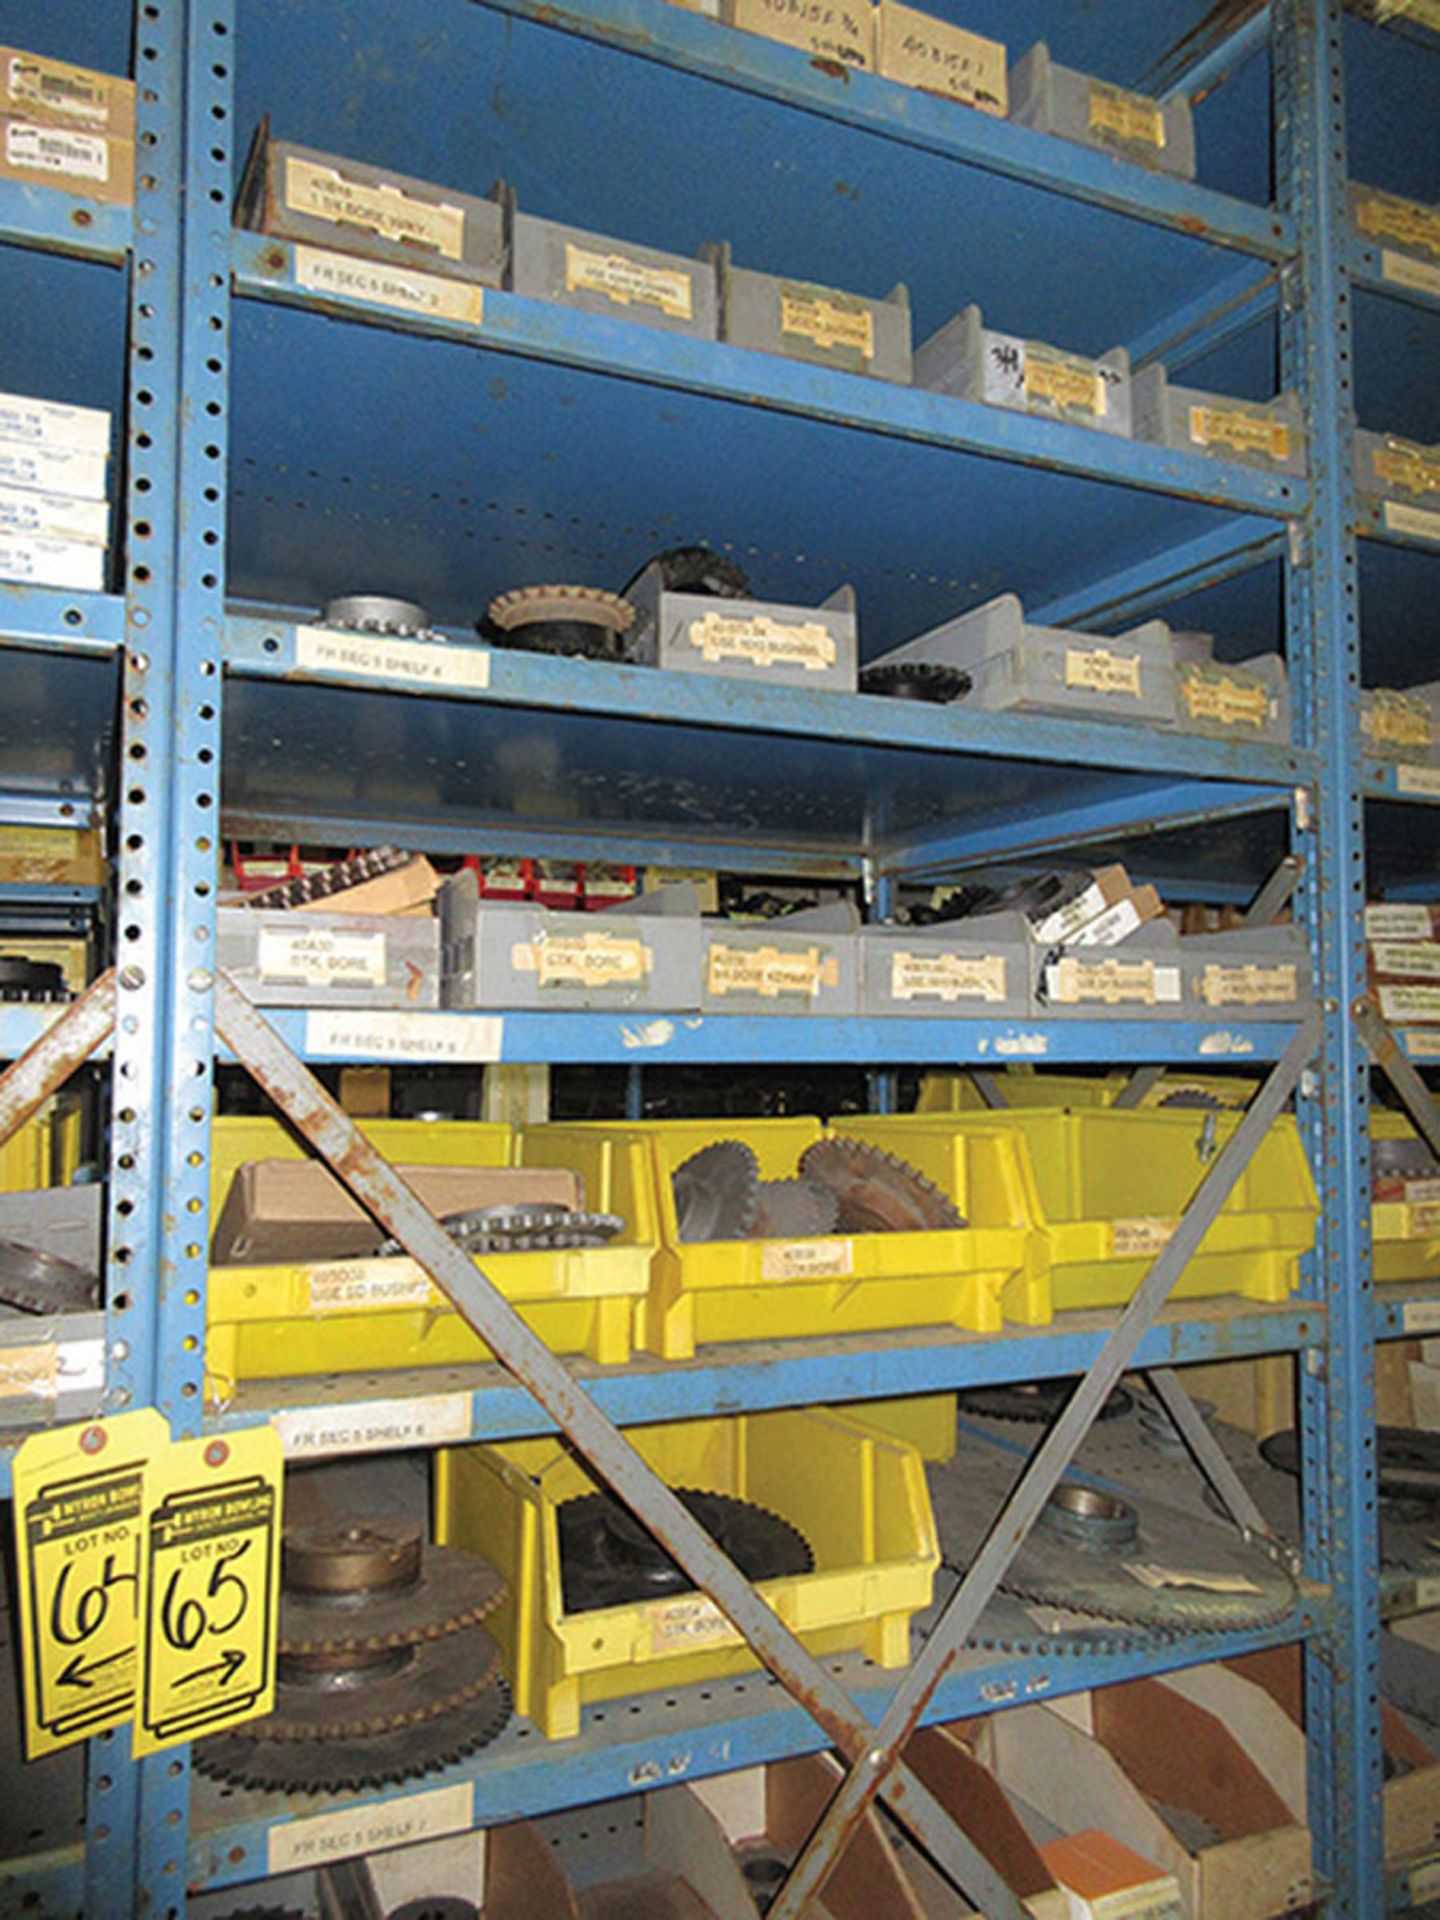 CONTENTS OF (1) SIDE, (5) SECTIONS OF SHELF UNIT: LARGE QUANTITY OF SOCKETS - MANY SIZES; BUSSMAN - Image 2 of 10